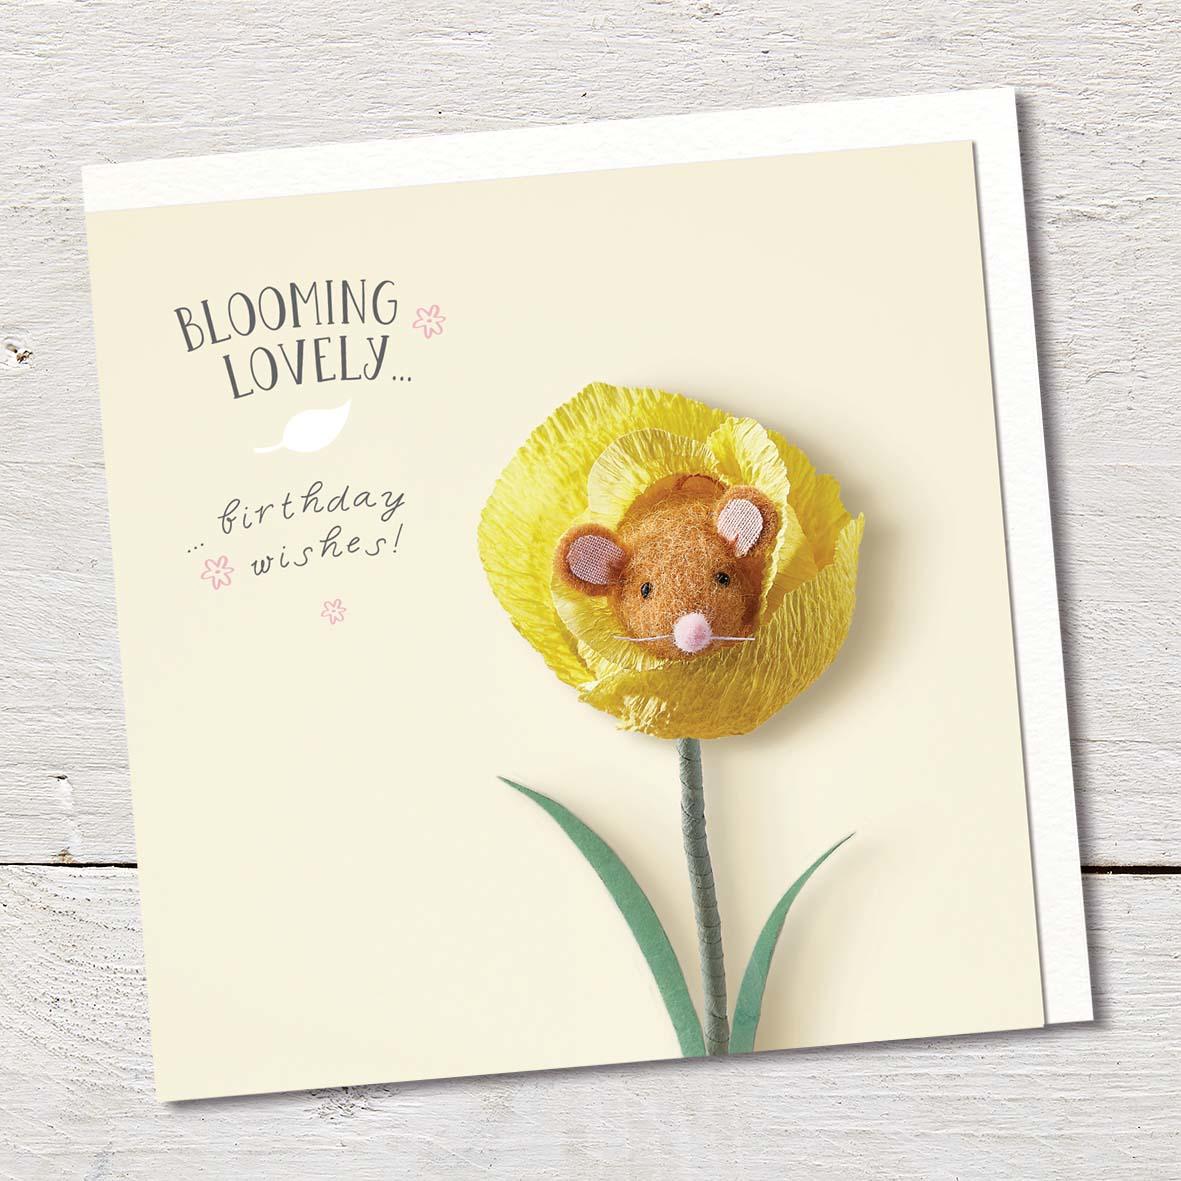 Card featuring a cute felted mouse sitting inside a yellow flower and peeping out.